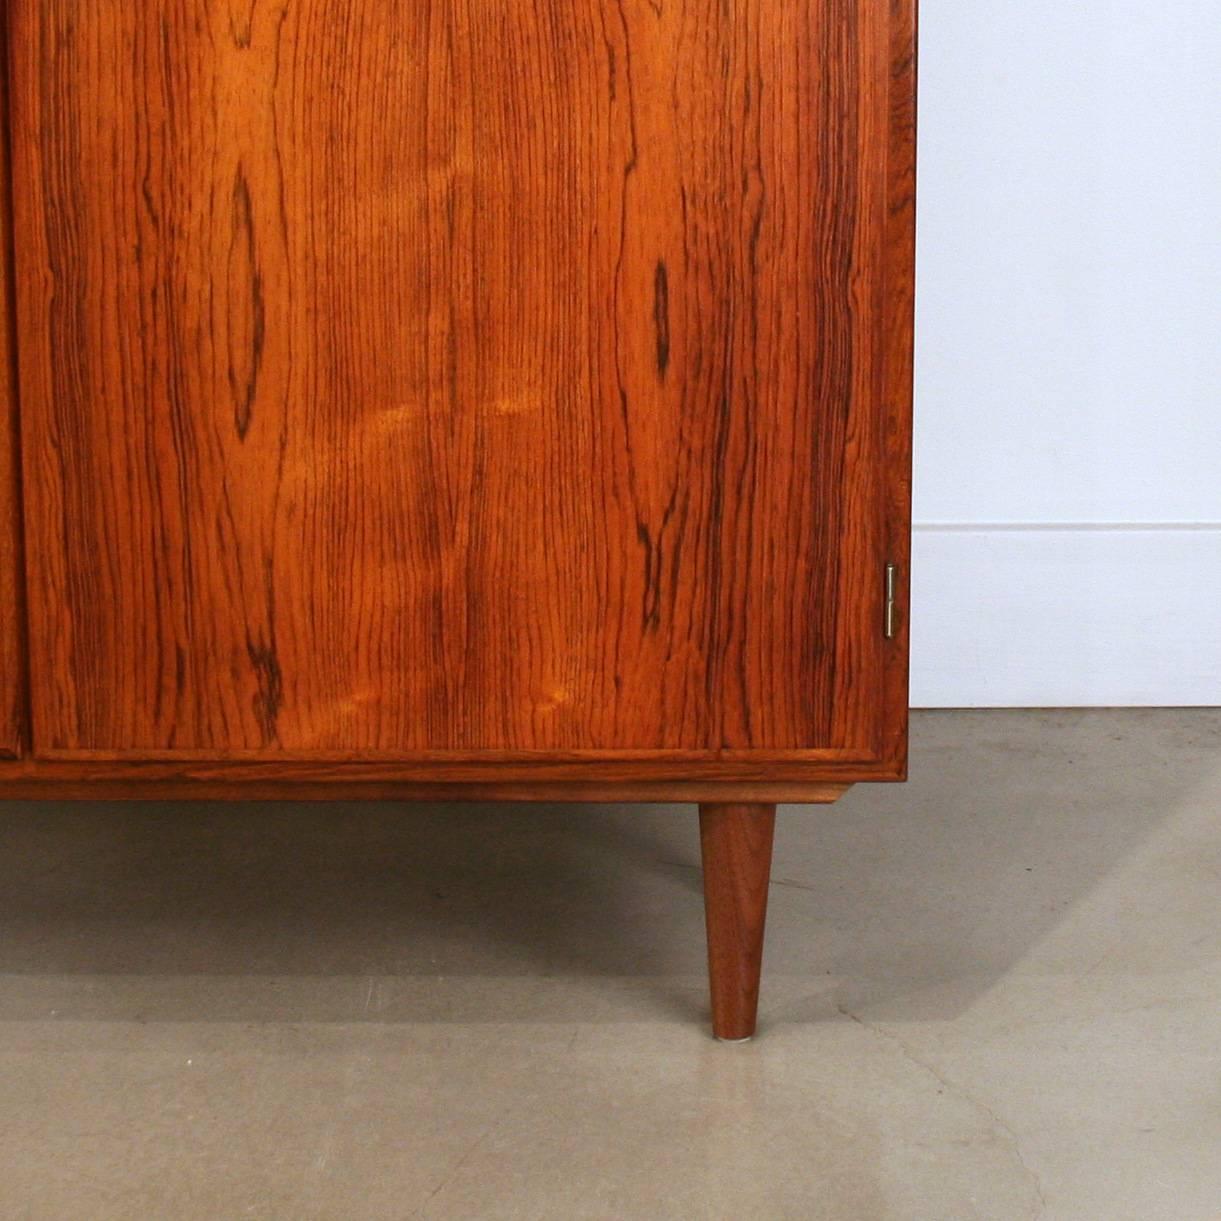 Stunning tall rosewood cabinet with solid rosewood pulls. Resting on short, solid conical legs. Interior opens with four adjustable shelves. Working original lock. Made in Denmark.